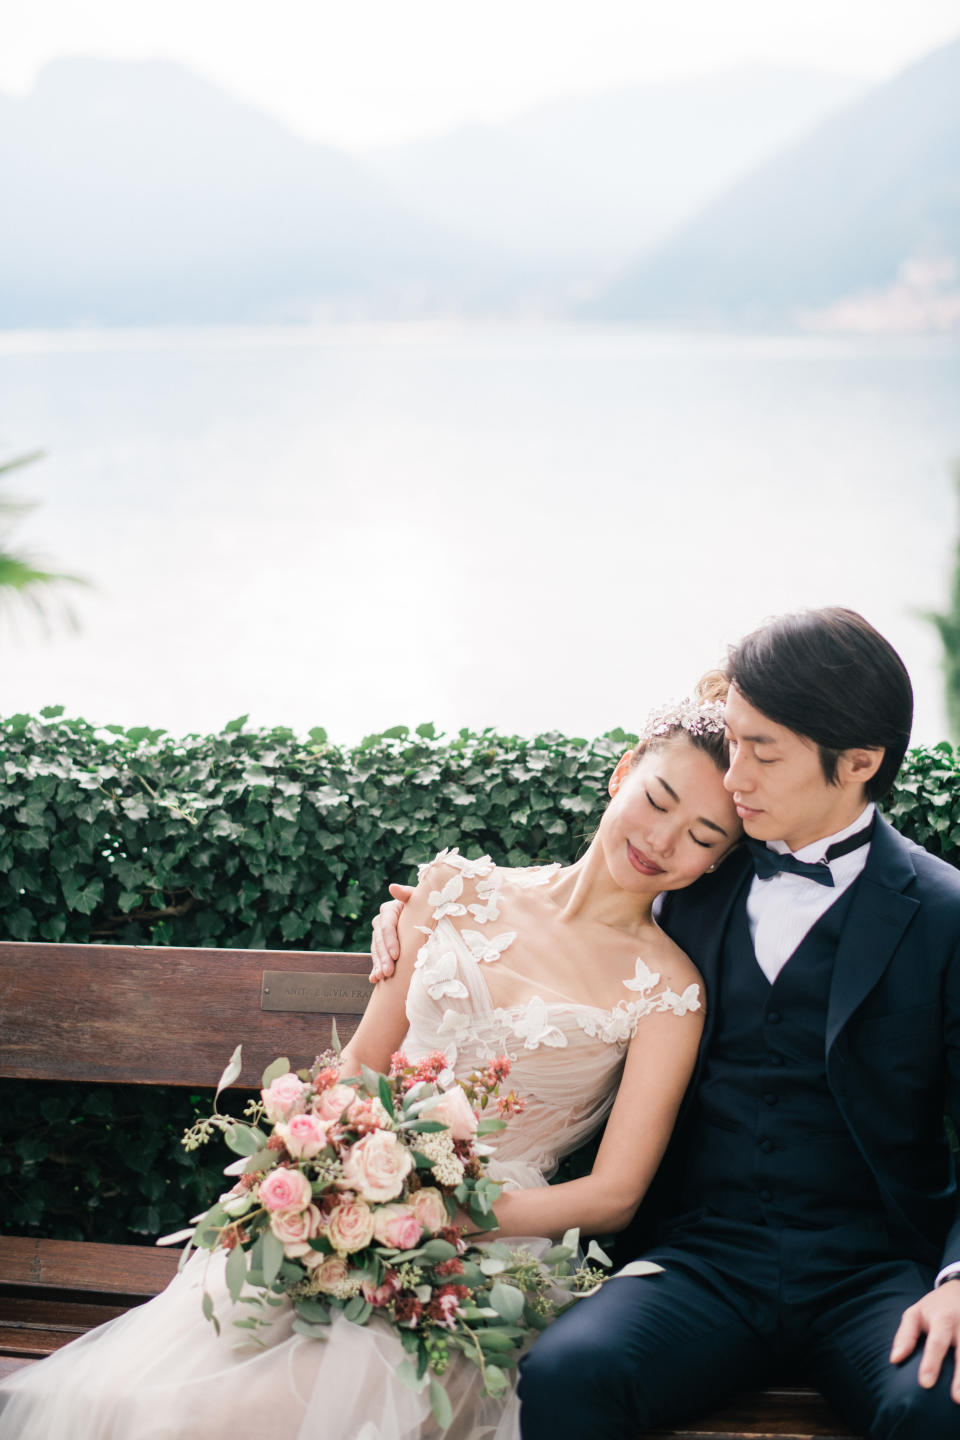 Due to travel restrictions, their loved ones were unable to fly in from Japan for the occasion. (Photo: <a href="https://www.manisolwedding.com/" target="_blank">ManiSol Wedding </a>)